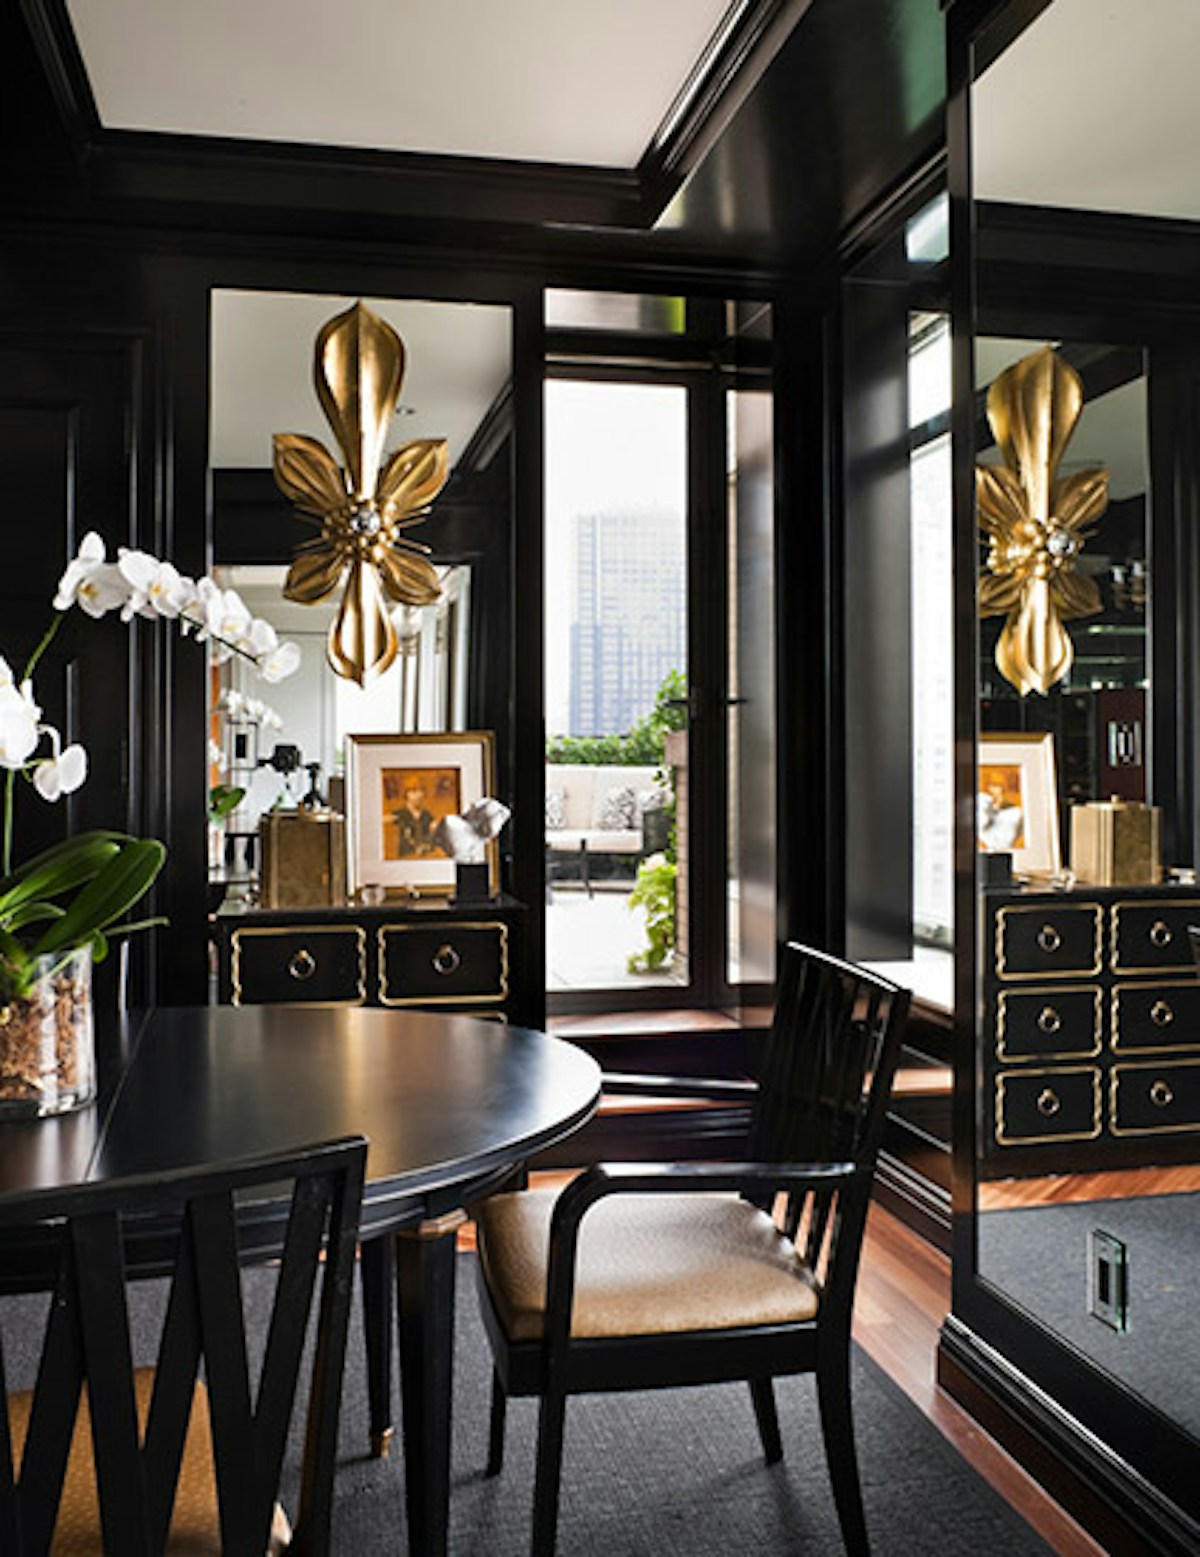 Luxury Black and Gold Interior Design - Find out more on LuxDeco Style Guide